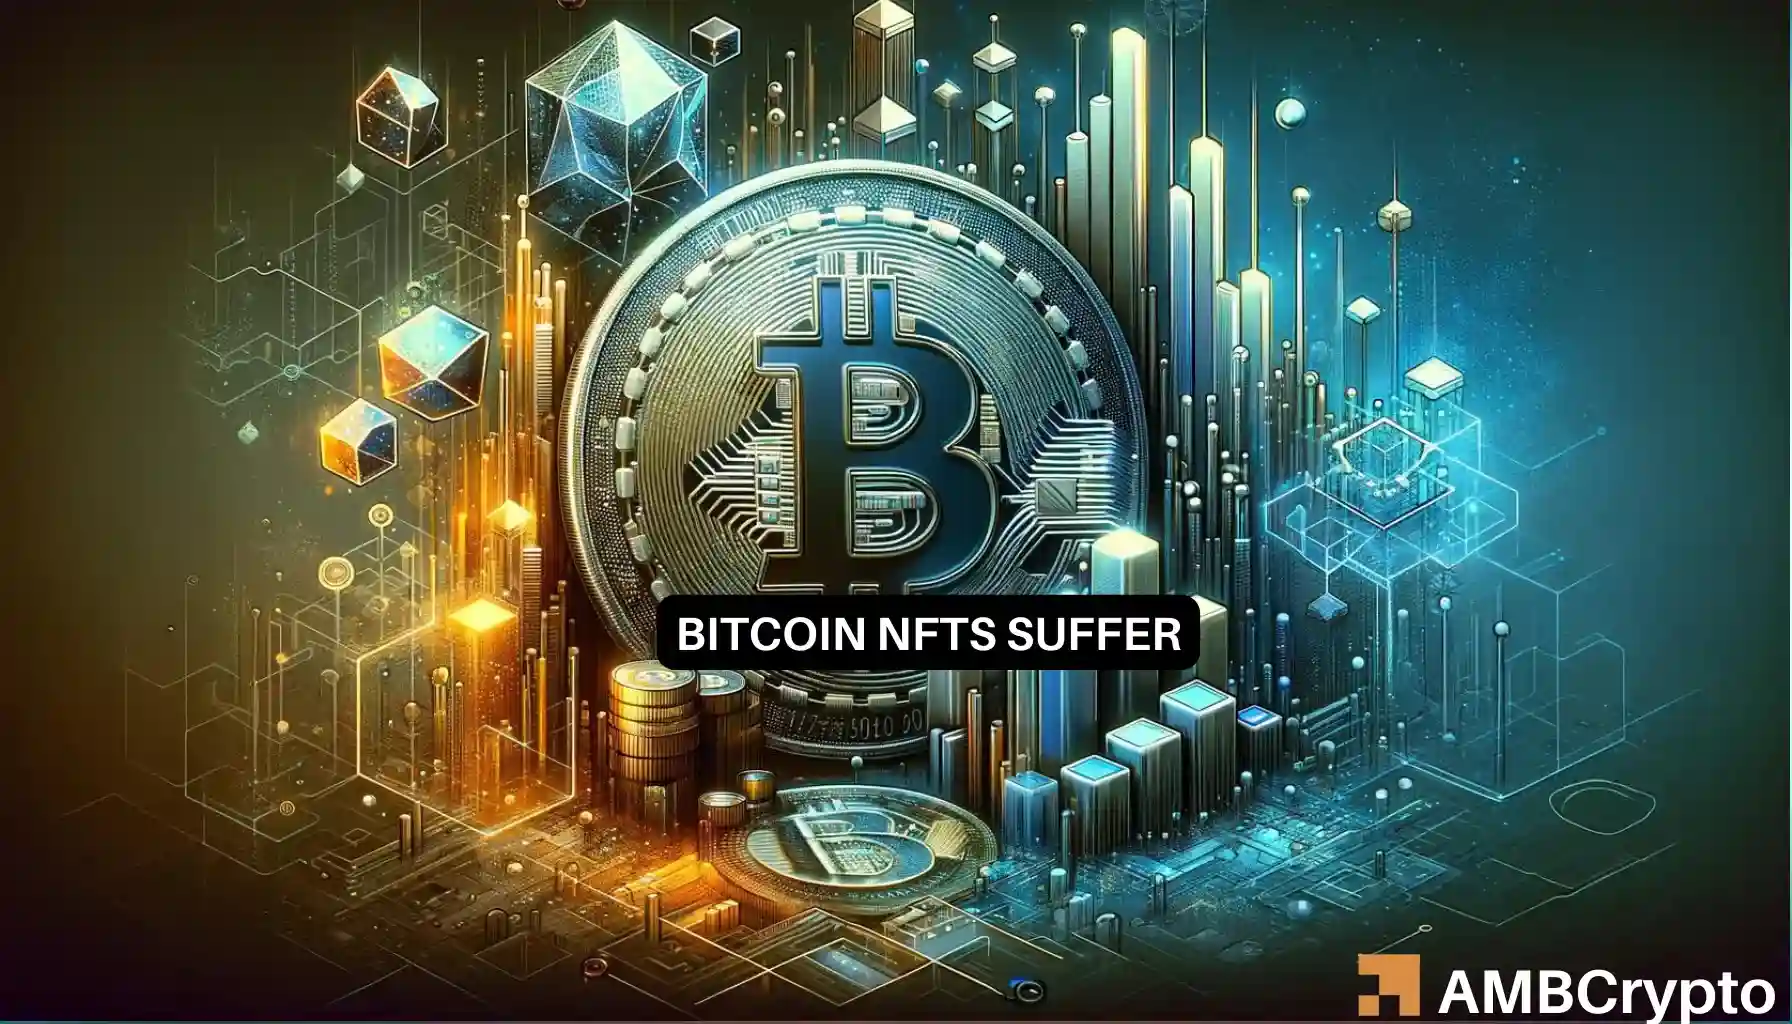 Assessing the Bitcoin network's future as NFTs, miners face challenges